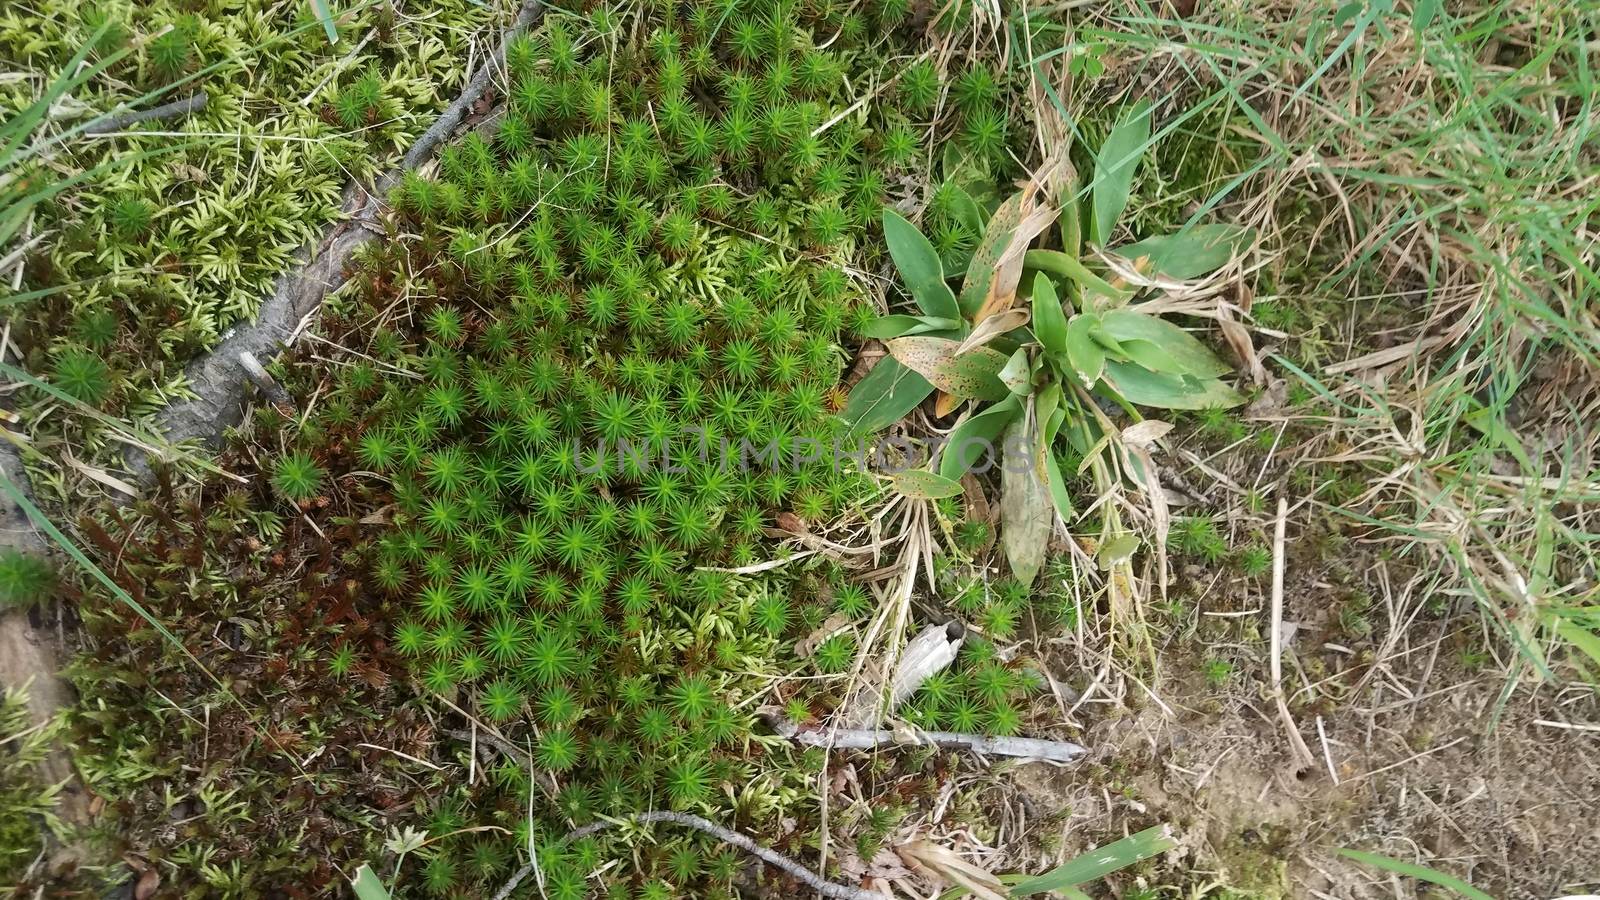 green moss and weeds and grass on ground by stockphotofan1